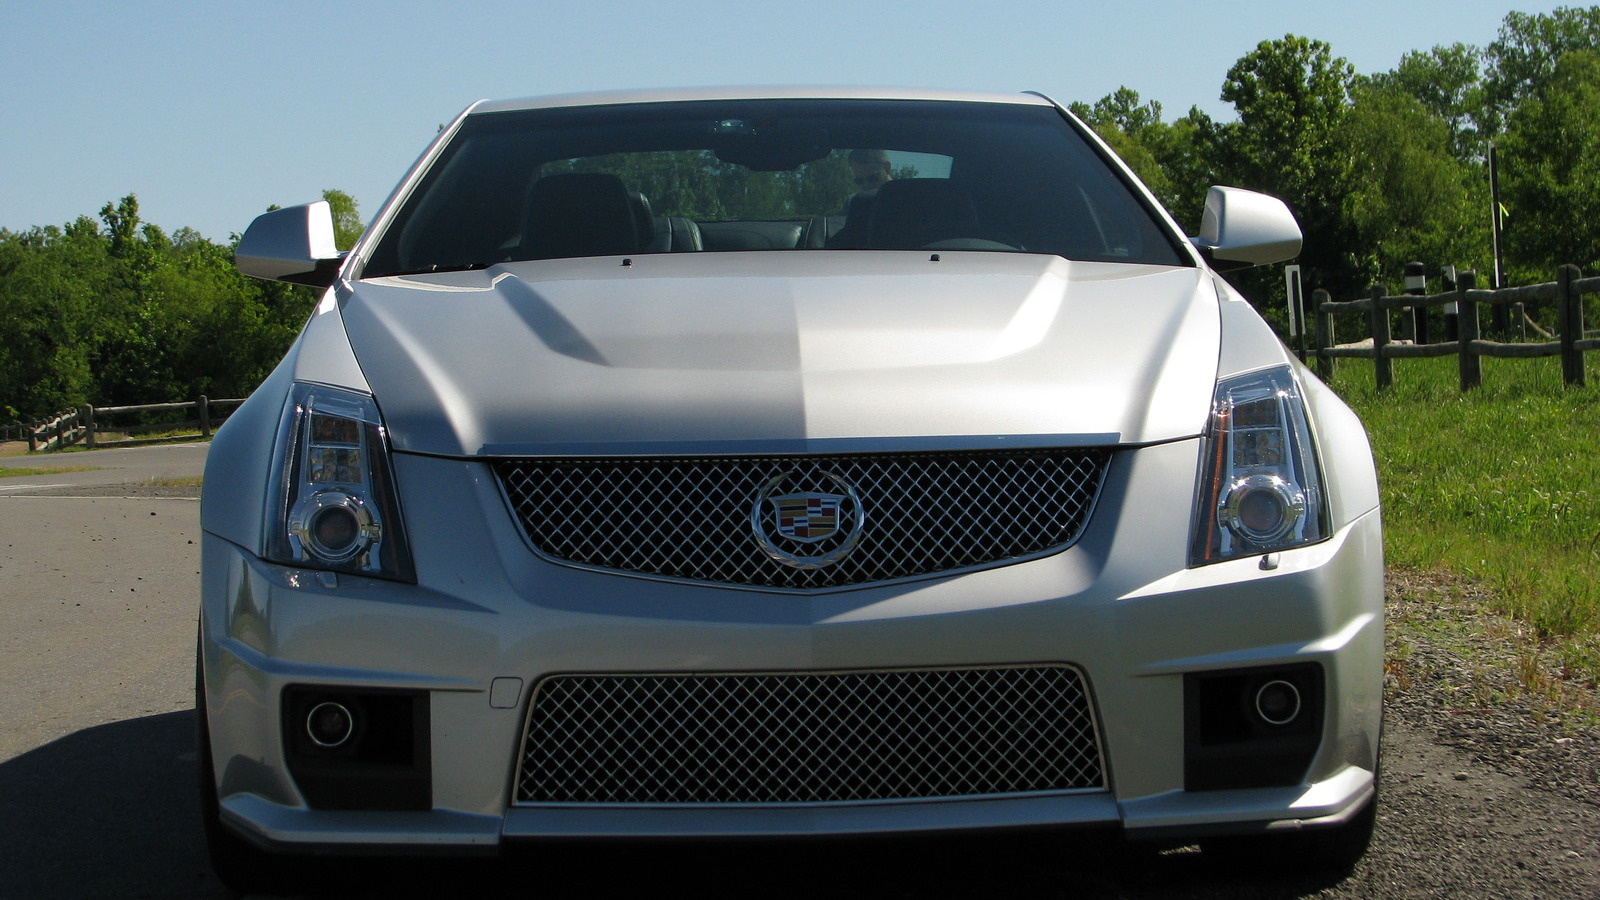 First Ride: 2011 Cadillac CTS-V Coupe